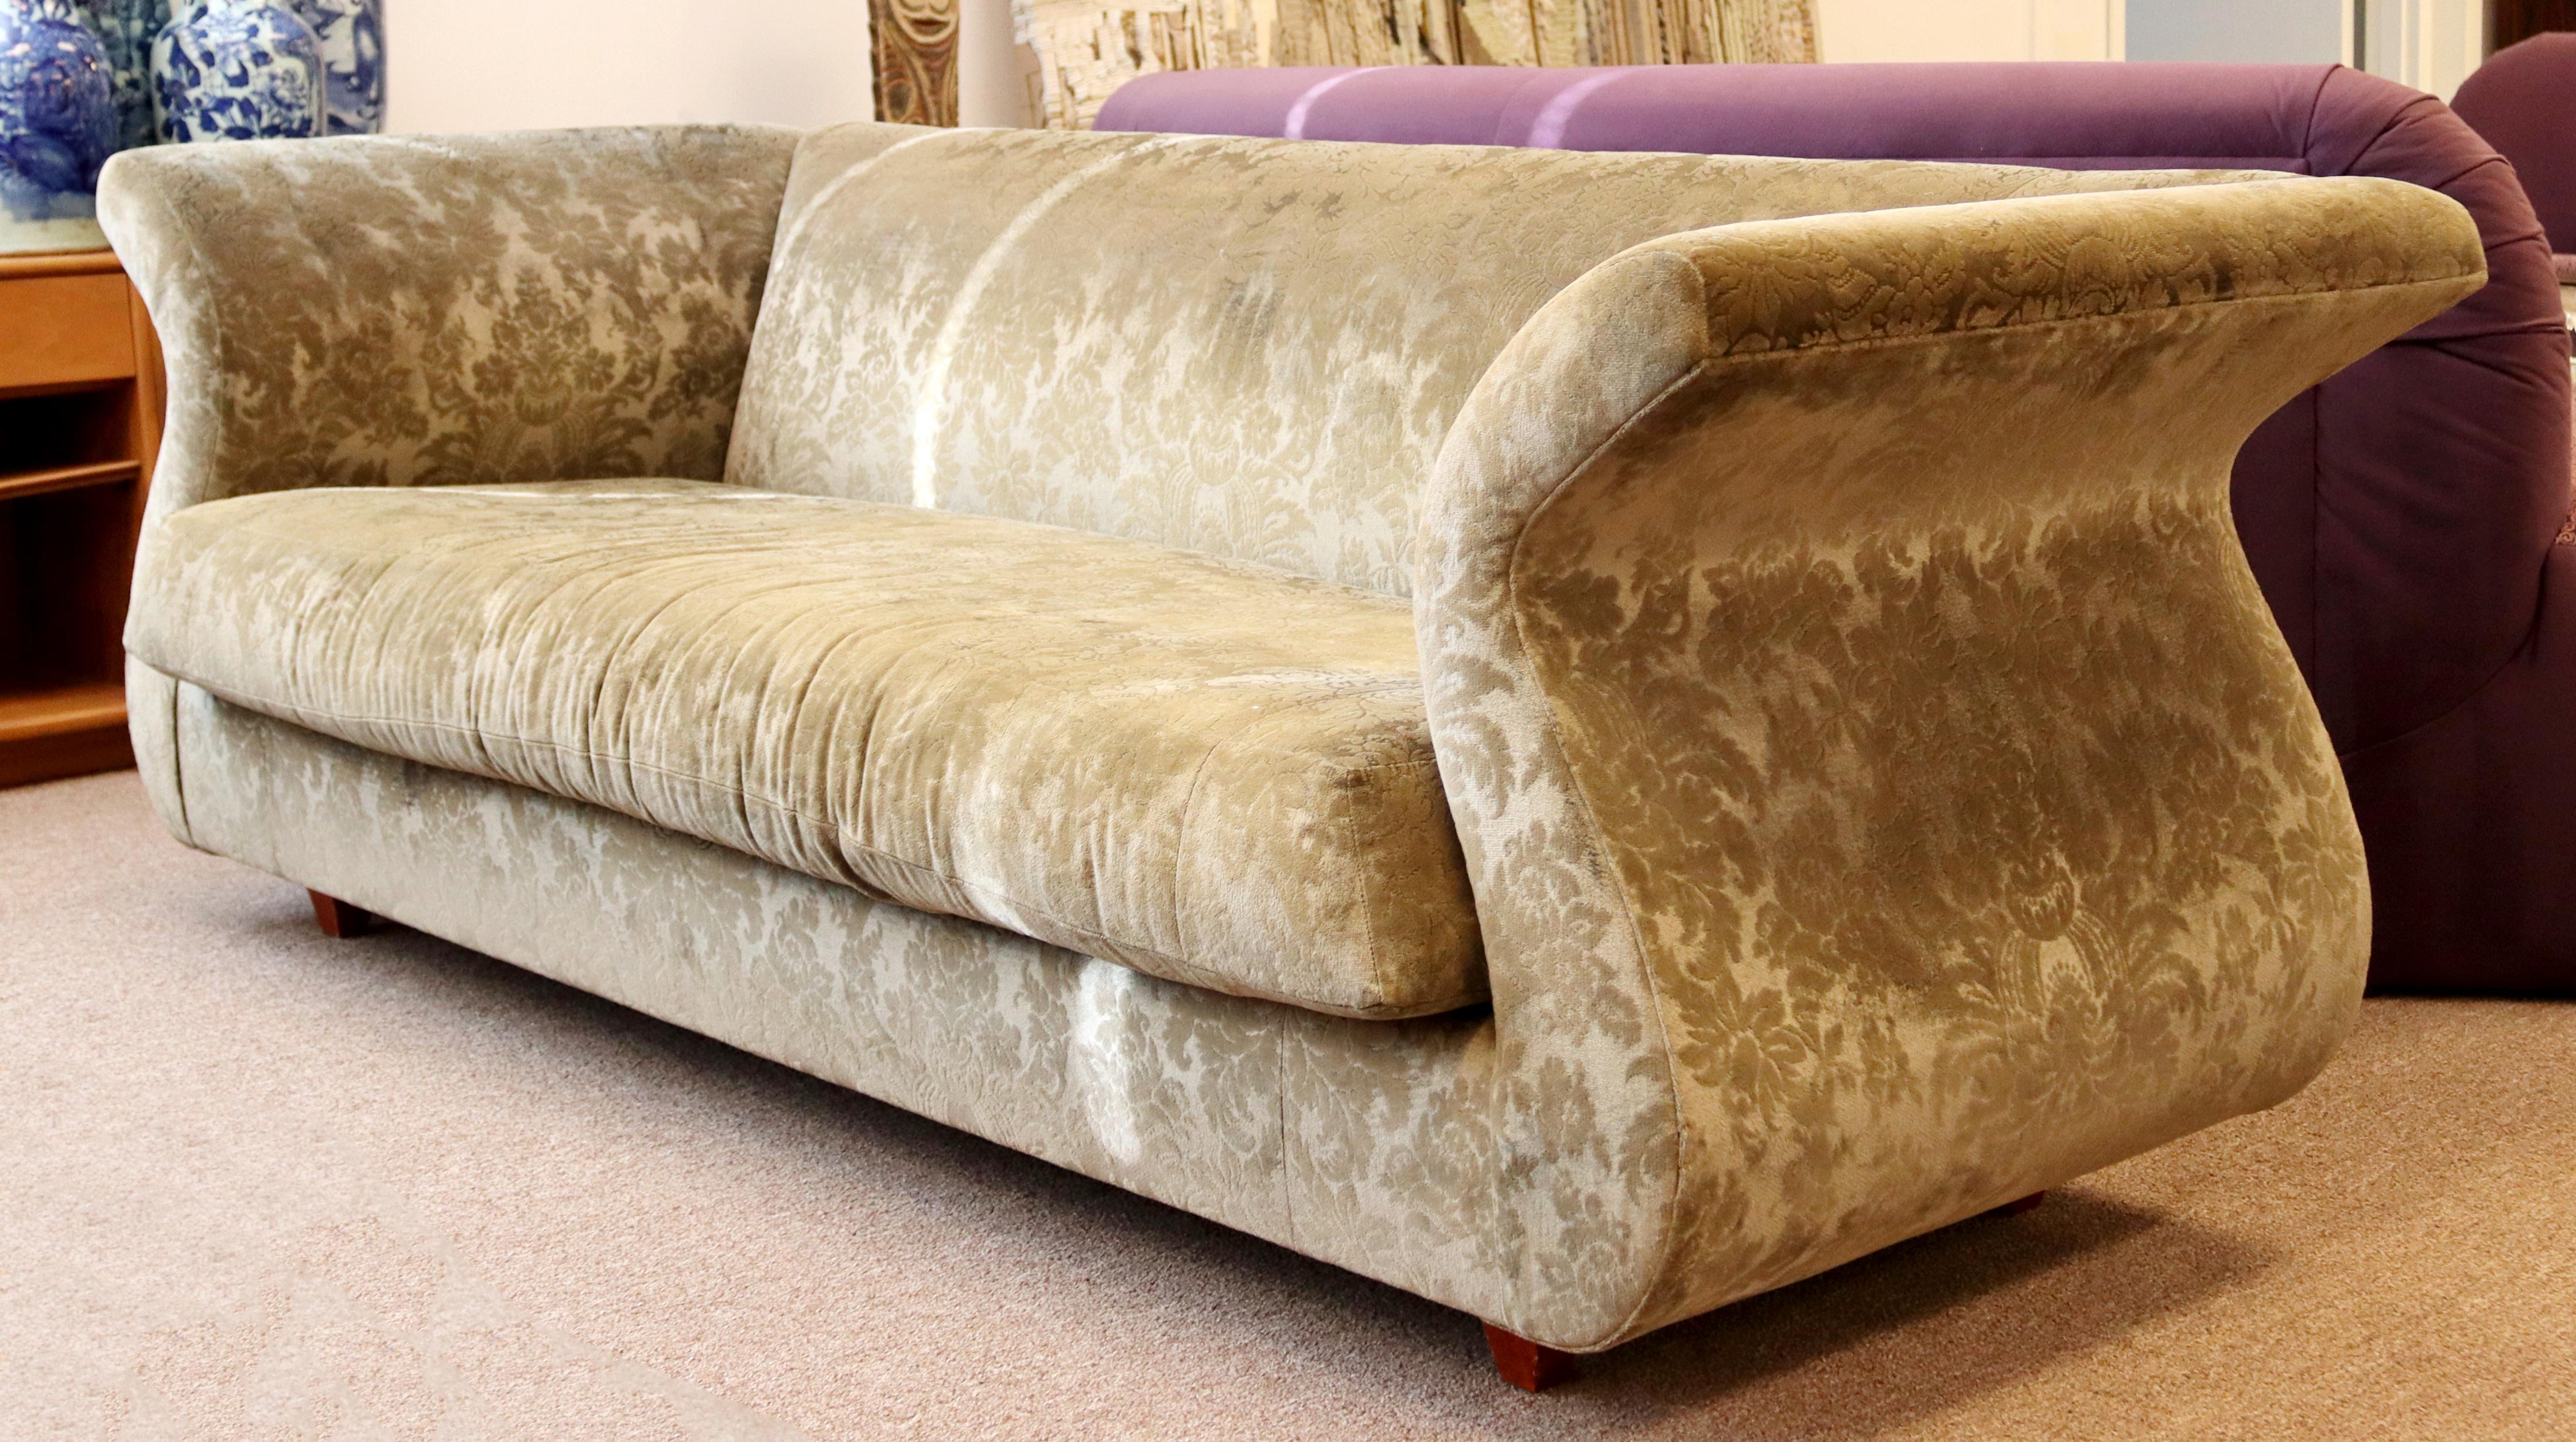 For your consideration is a fantastic sofa, with a floral beige velvet upholstery, in the gondola style, by Dialogica. In very good condition. The dimensions are 83